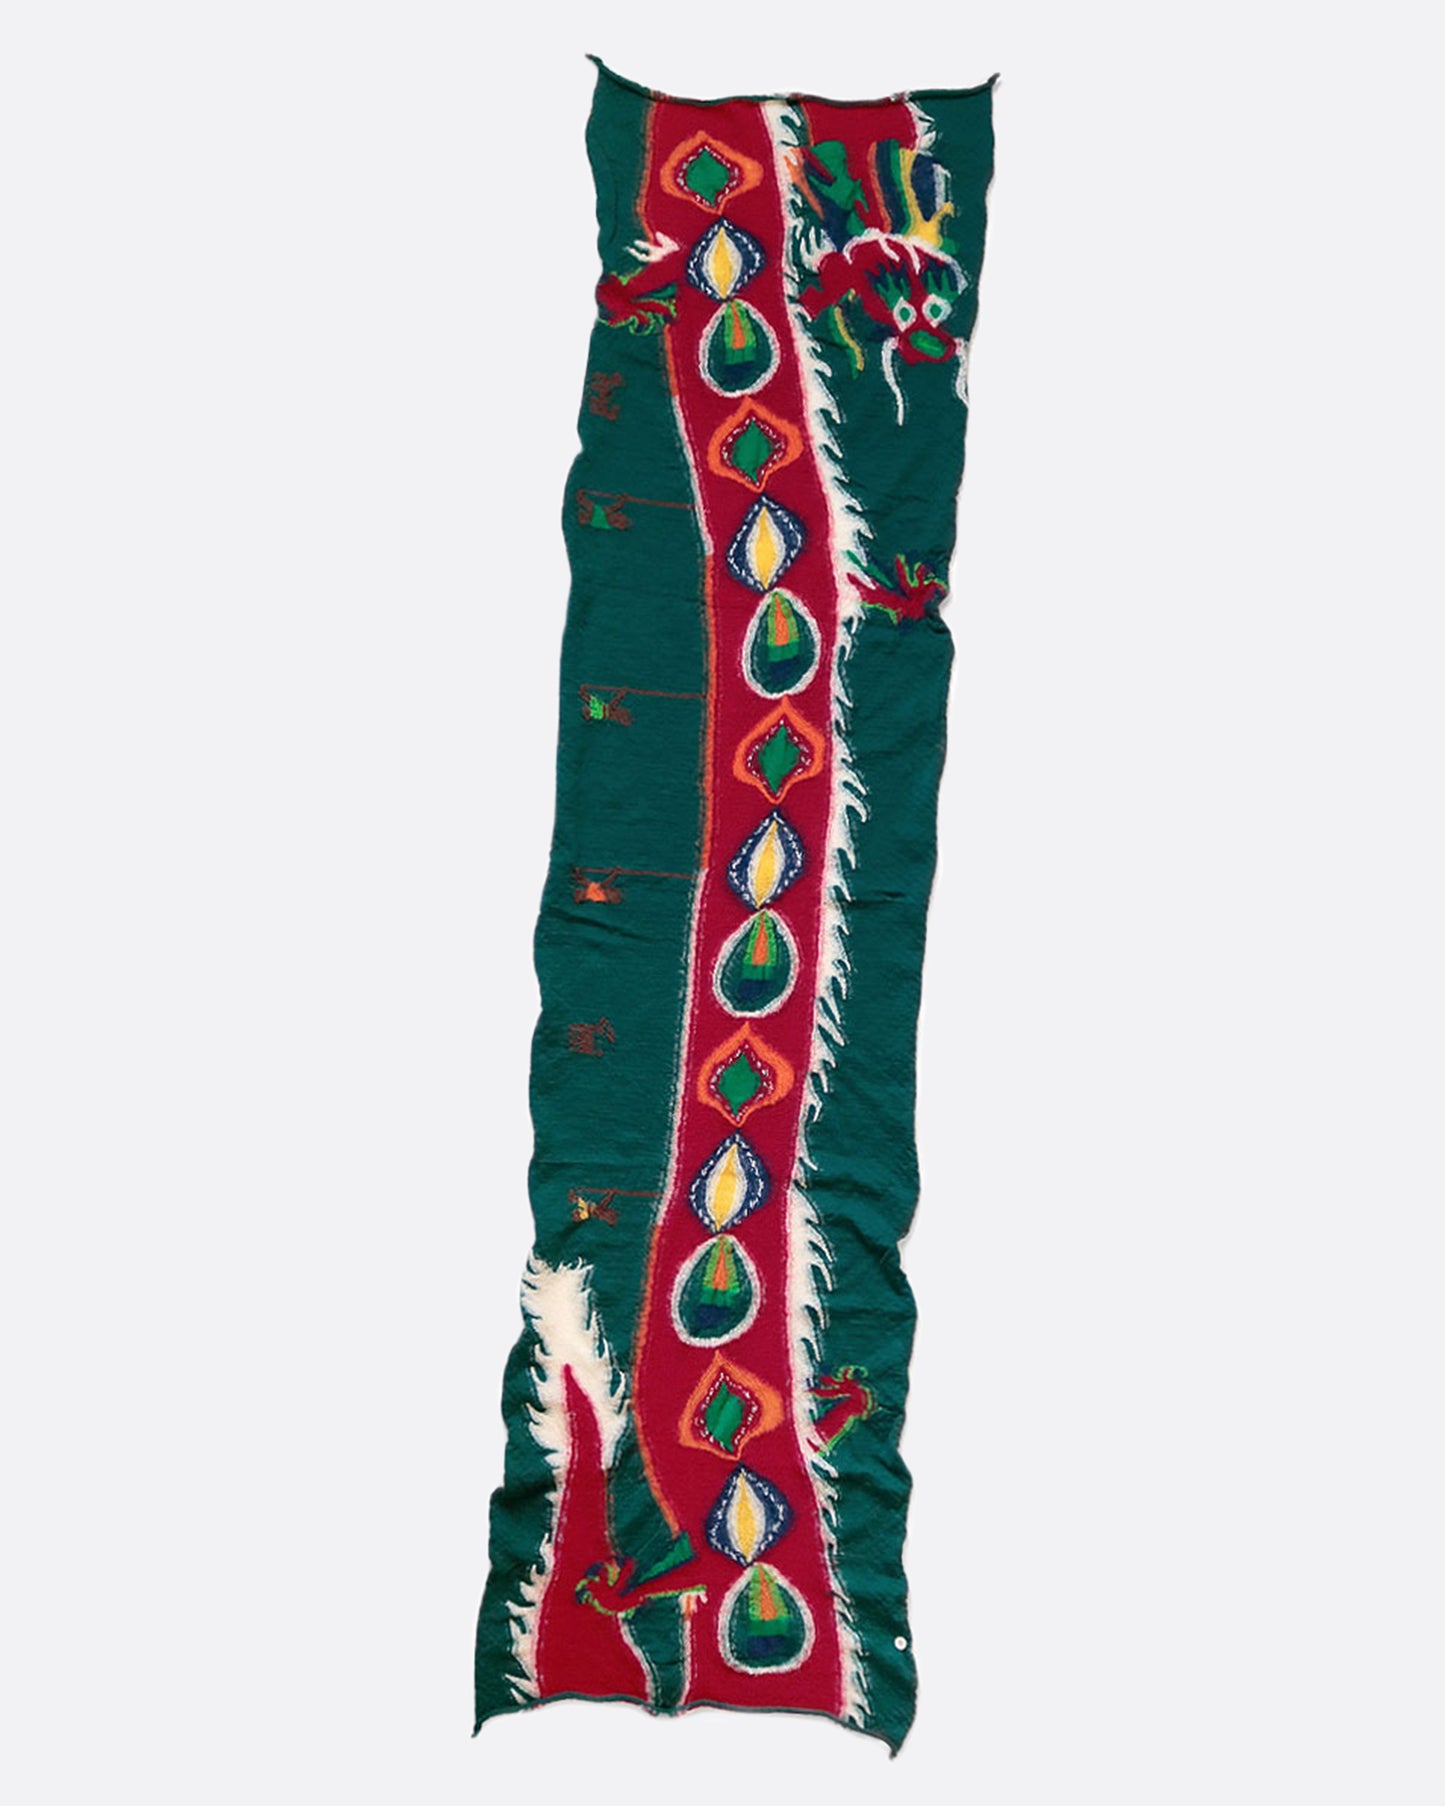 A wool scarf featuring a traditional Chinese dragon dance designed using bright colors and glitter thread.